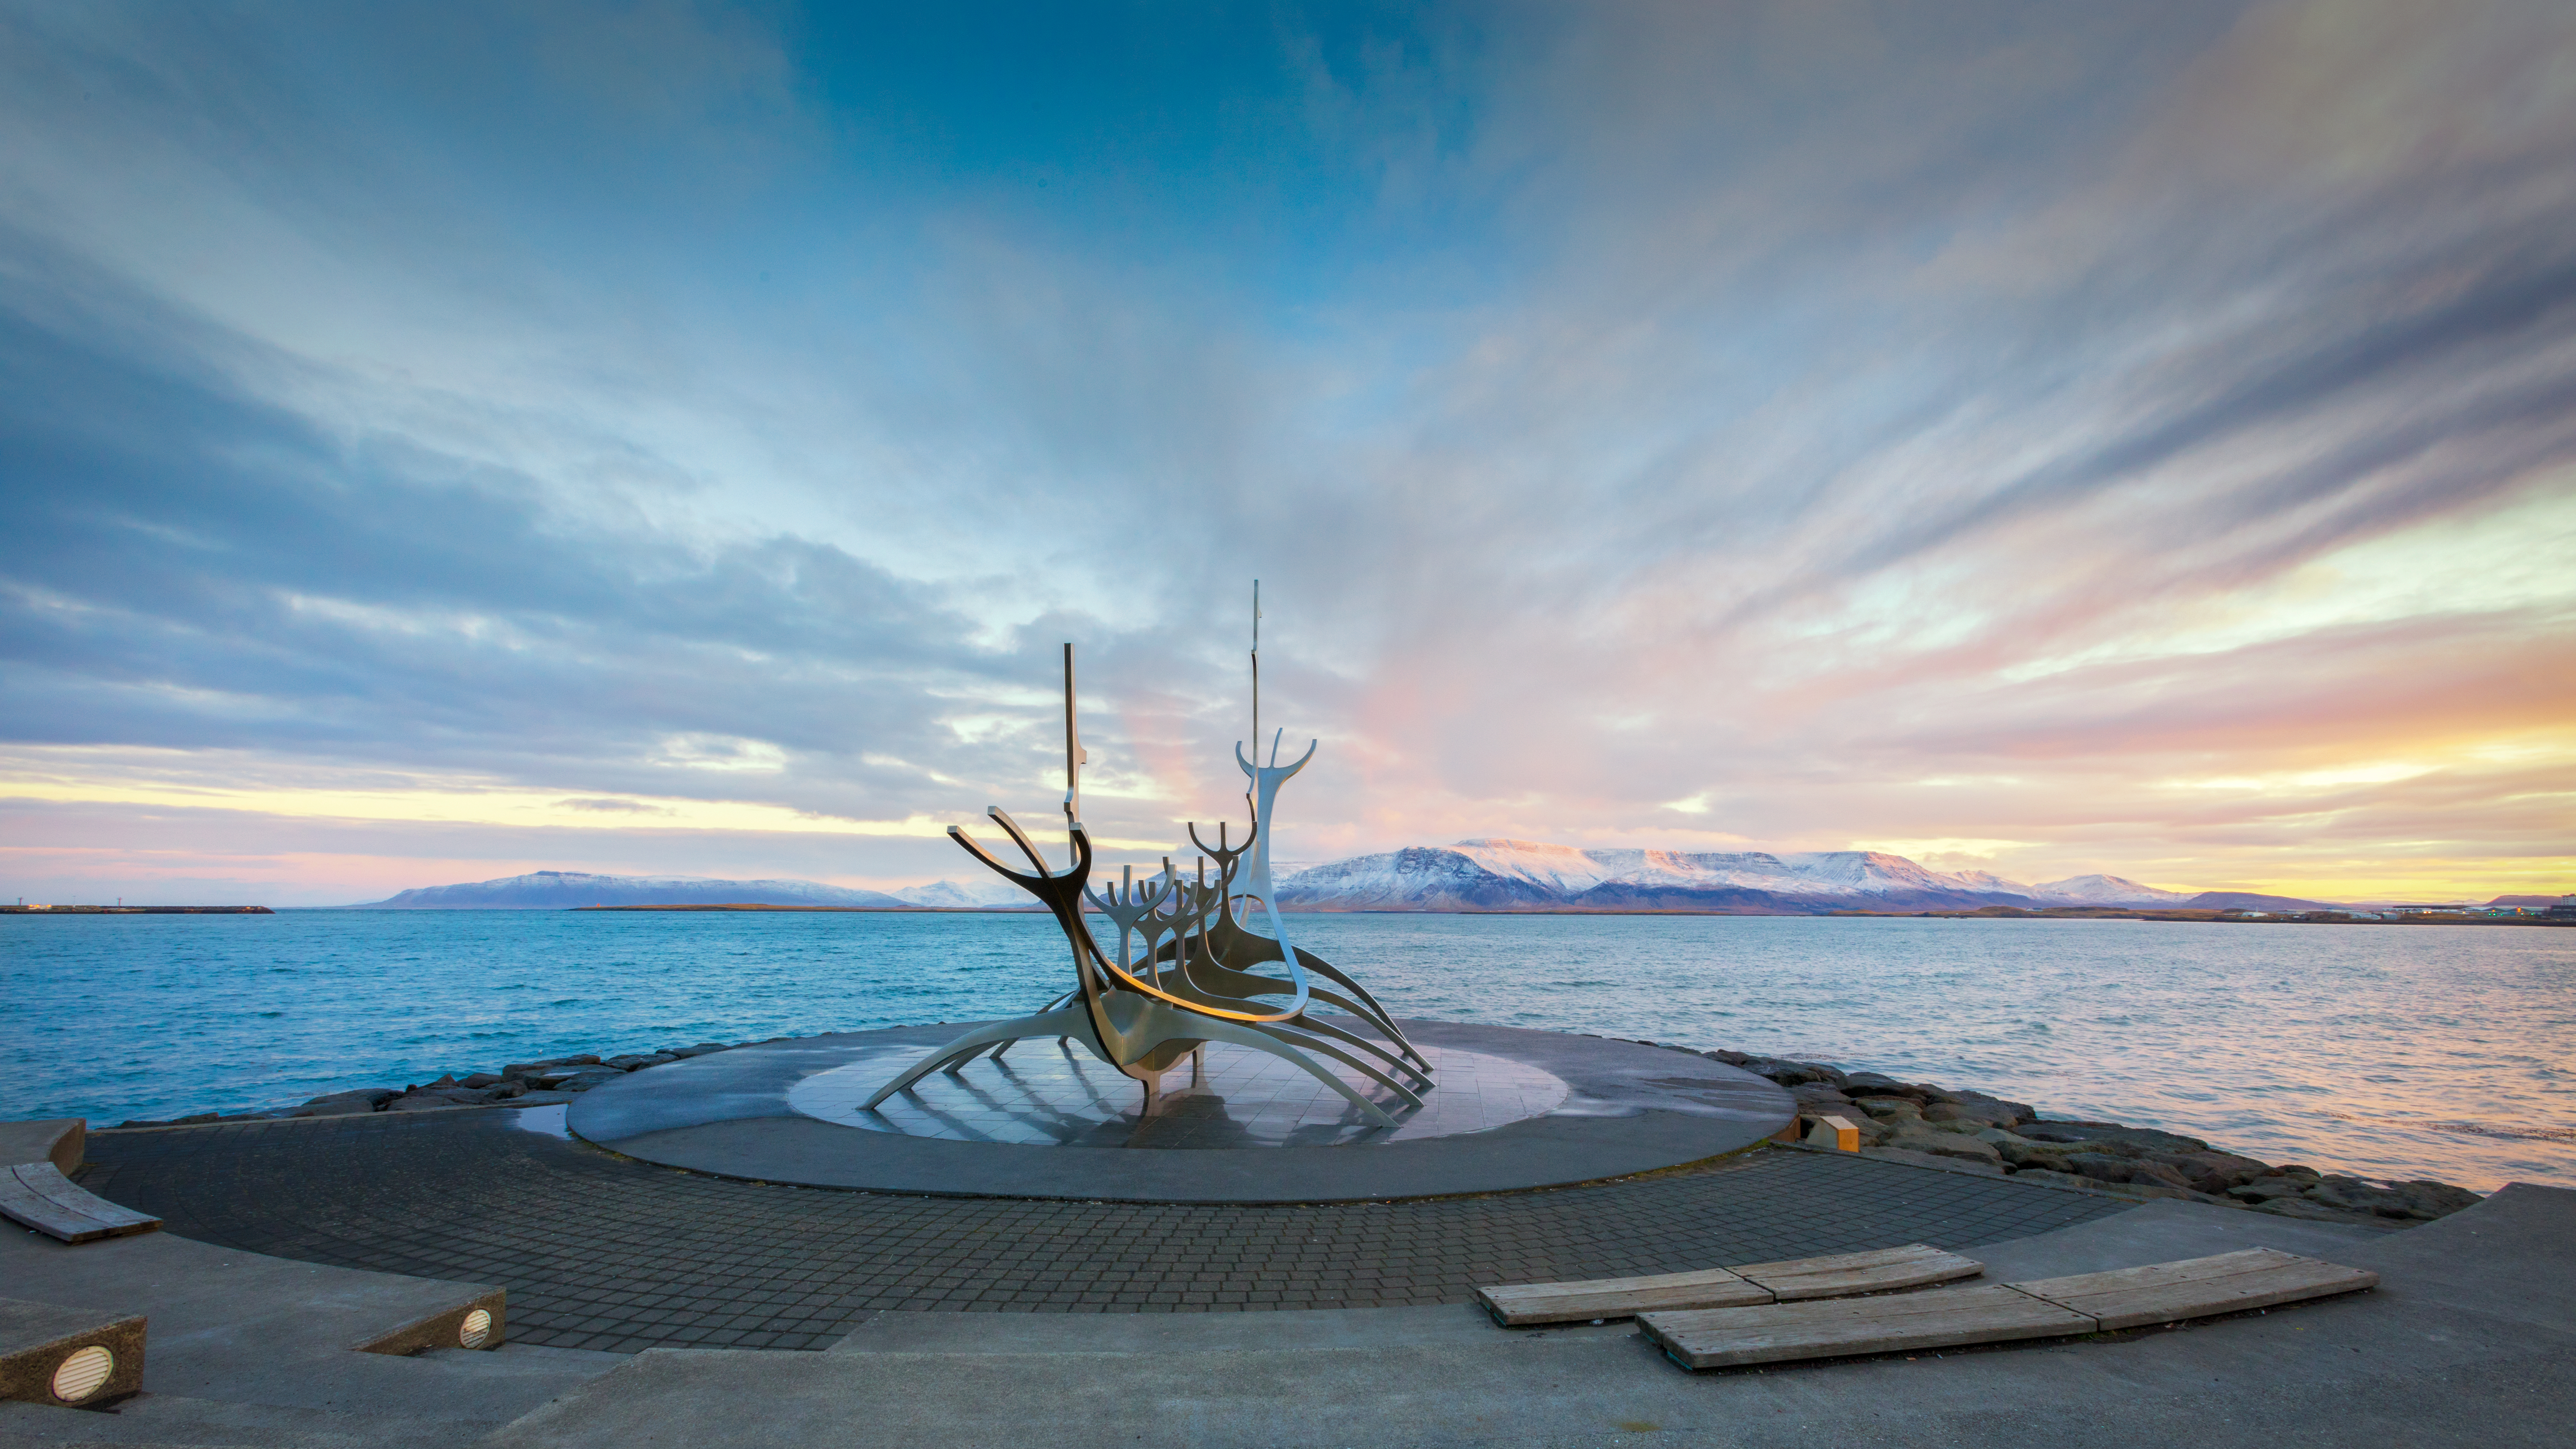 Sun Voyager, or Solfar, is a sculpture by Jon Gunnar Arnason, located in Reykjavík, Iceland. Sun Voyager is described as a dreamboat, or an ode to the sun.